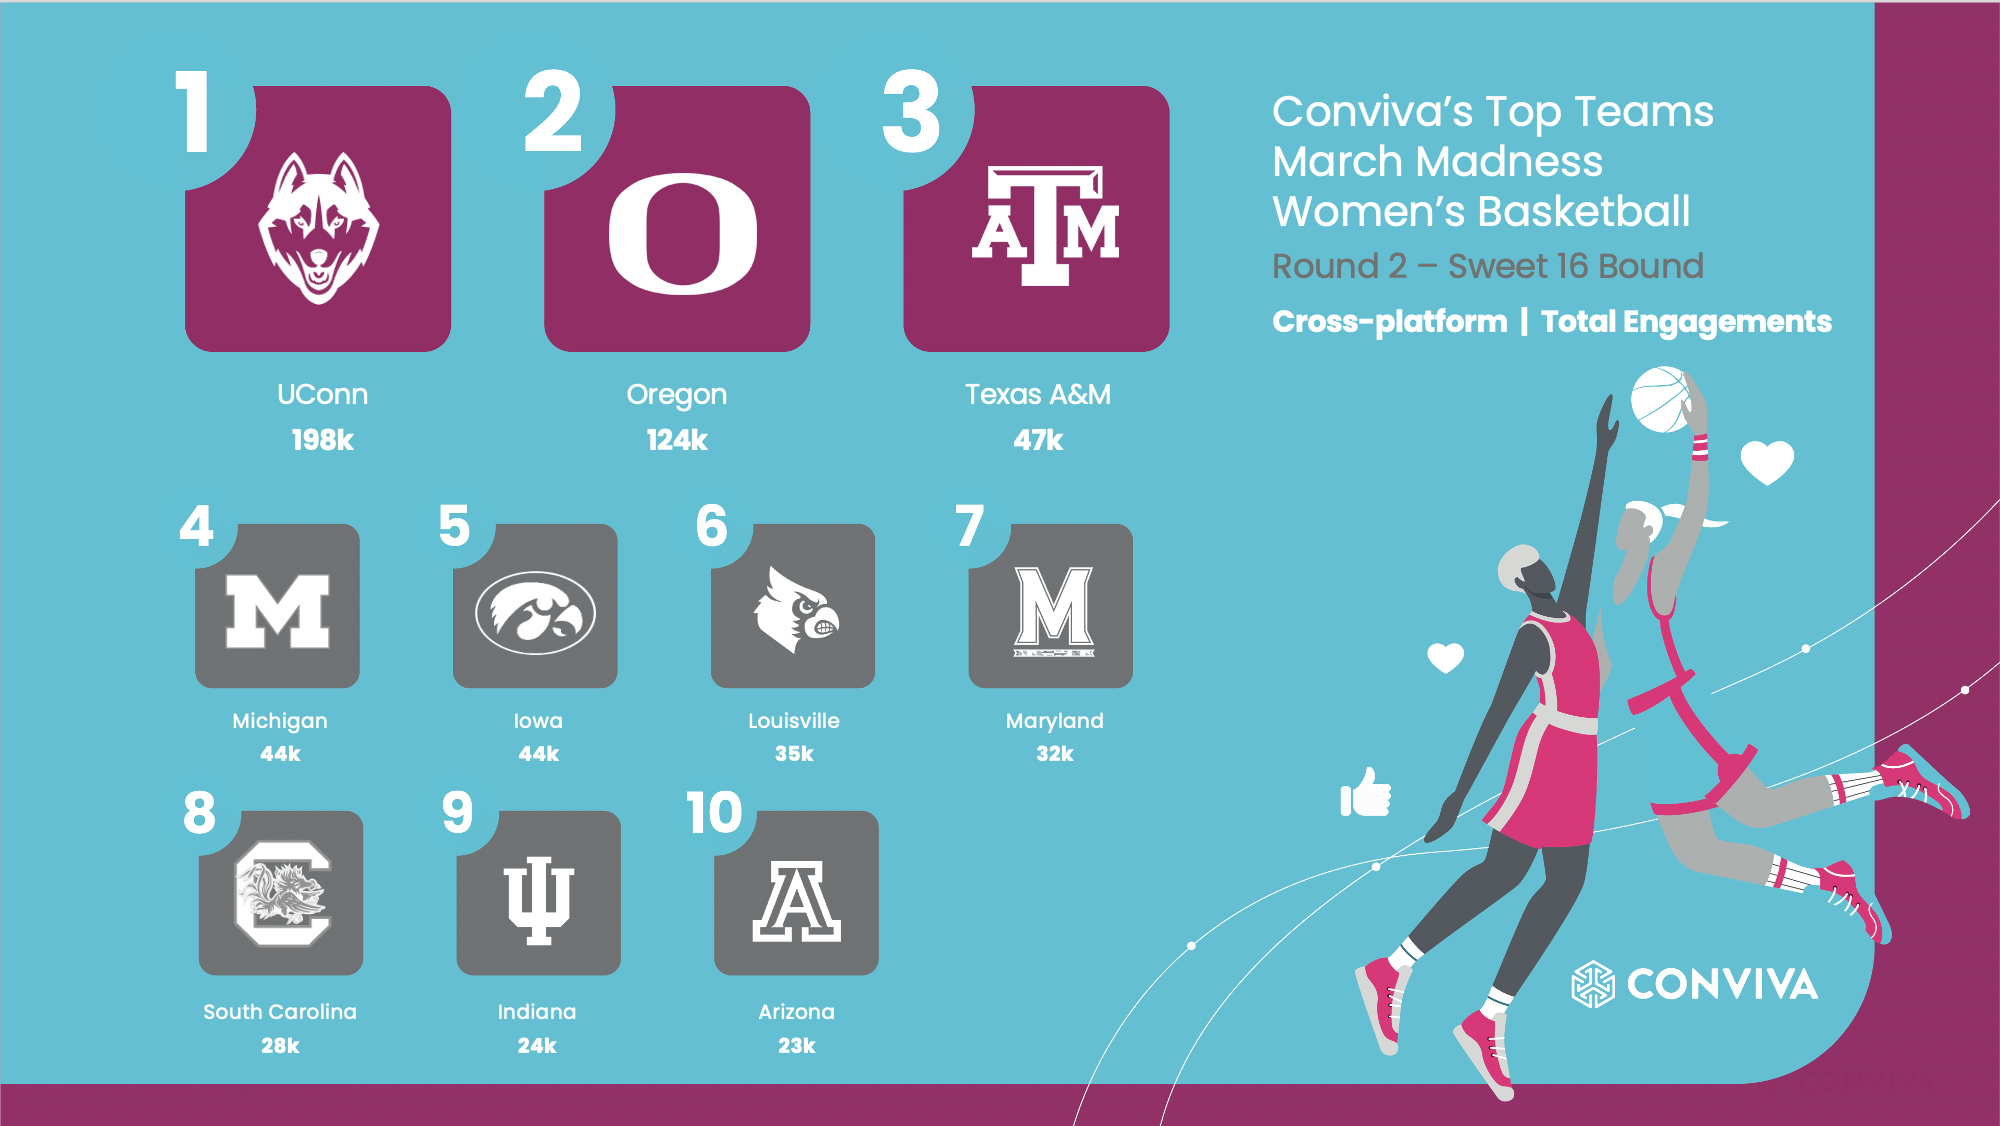 Conviva's Top Teams March Madness Round 2 Women's Basketball Graphic